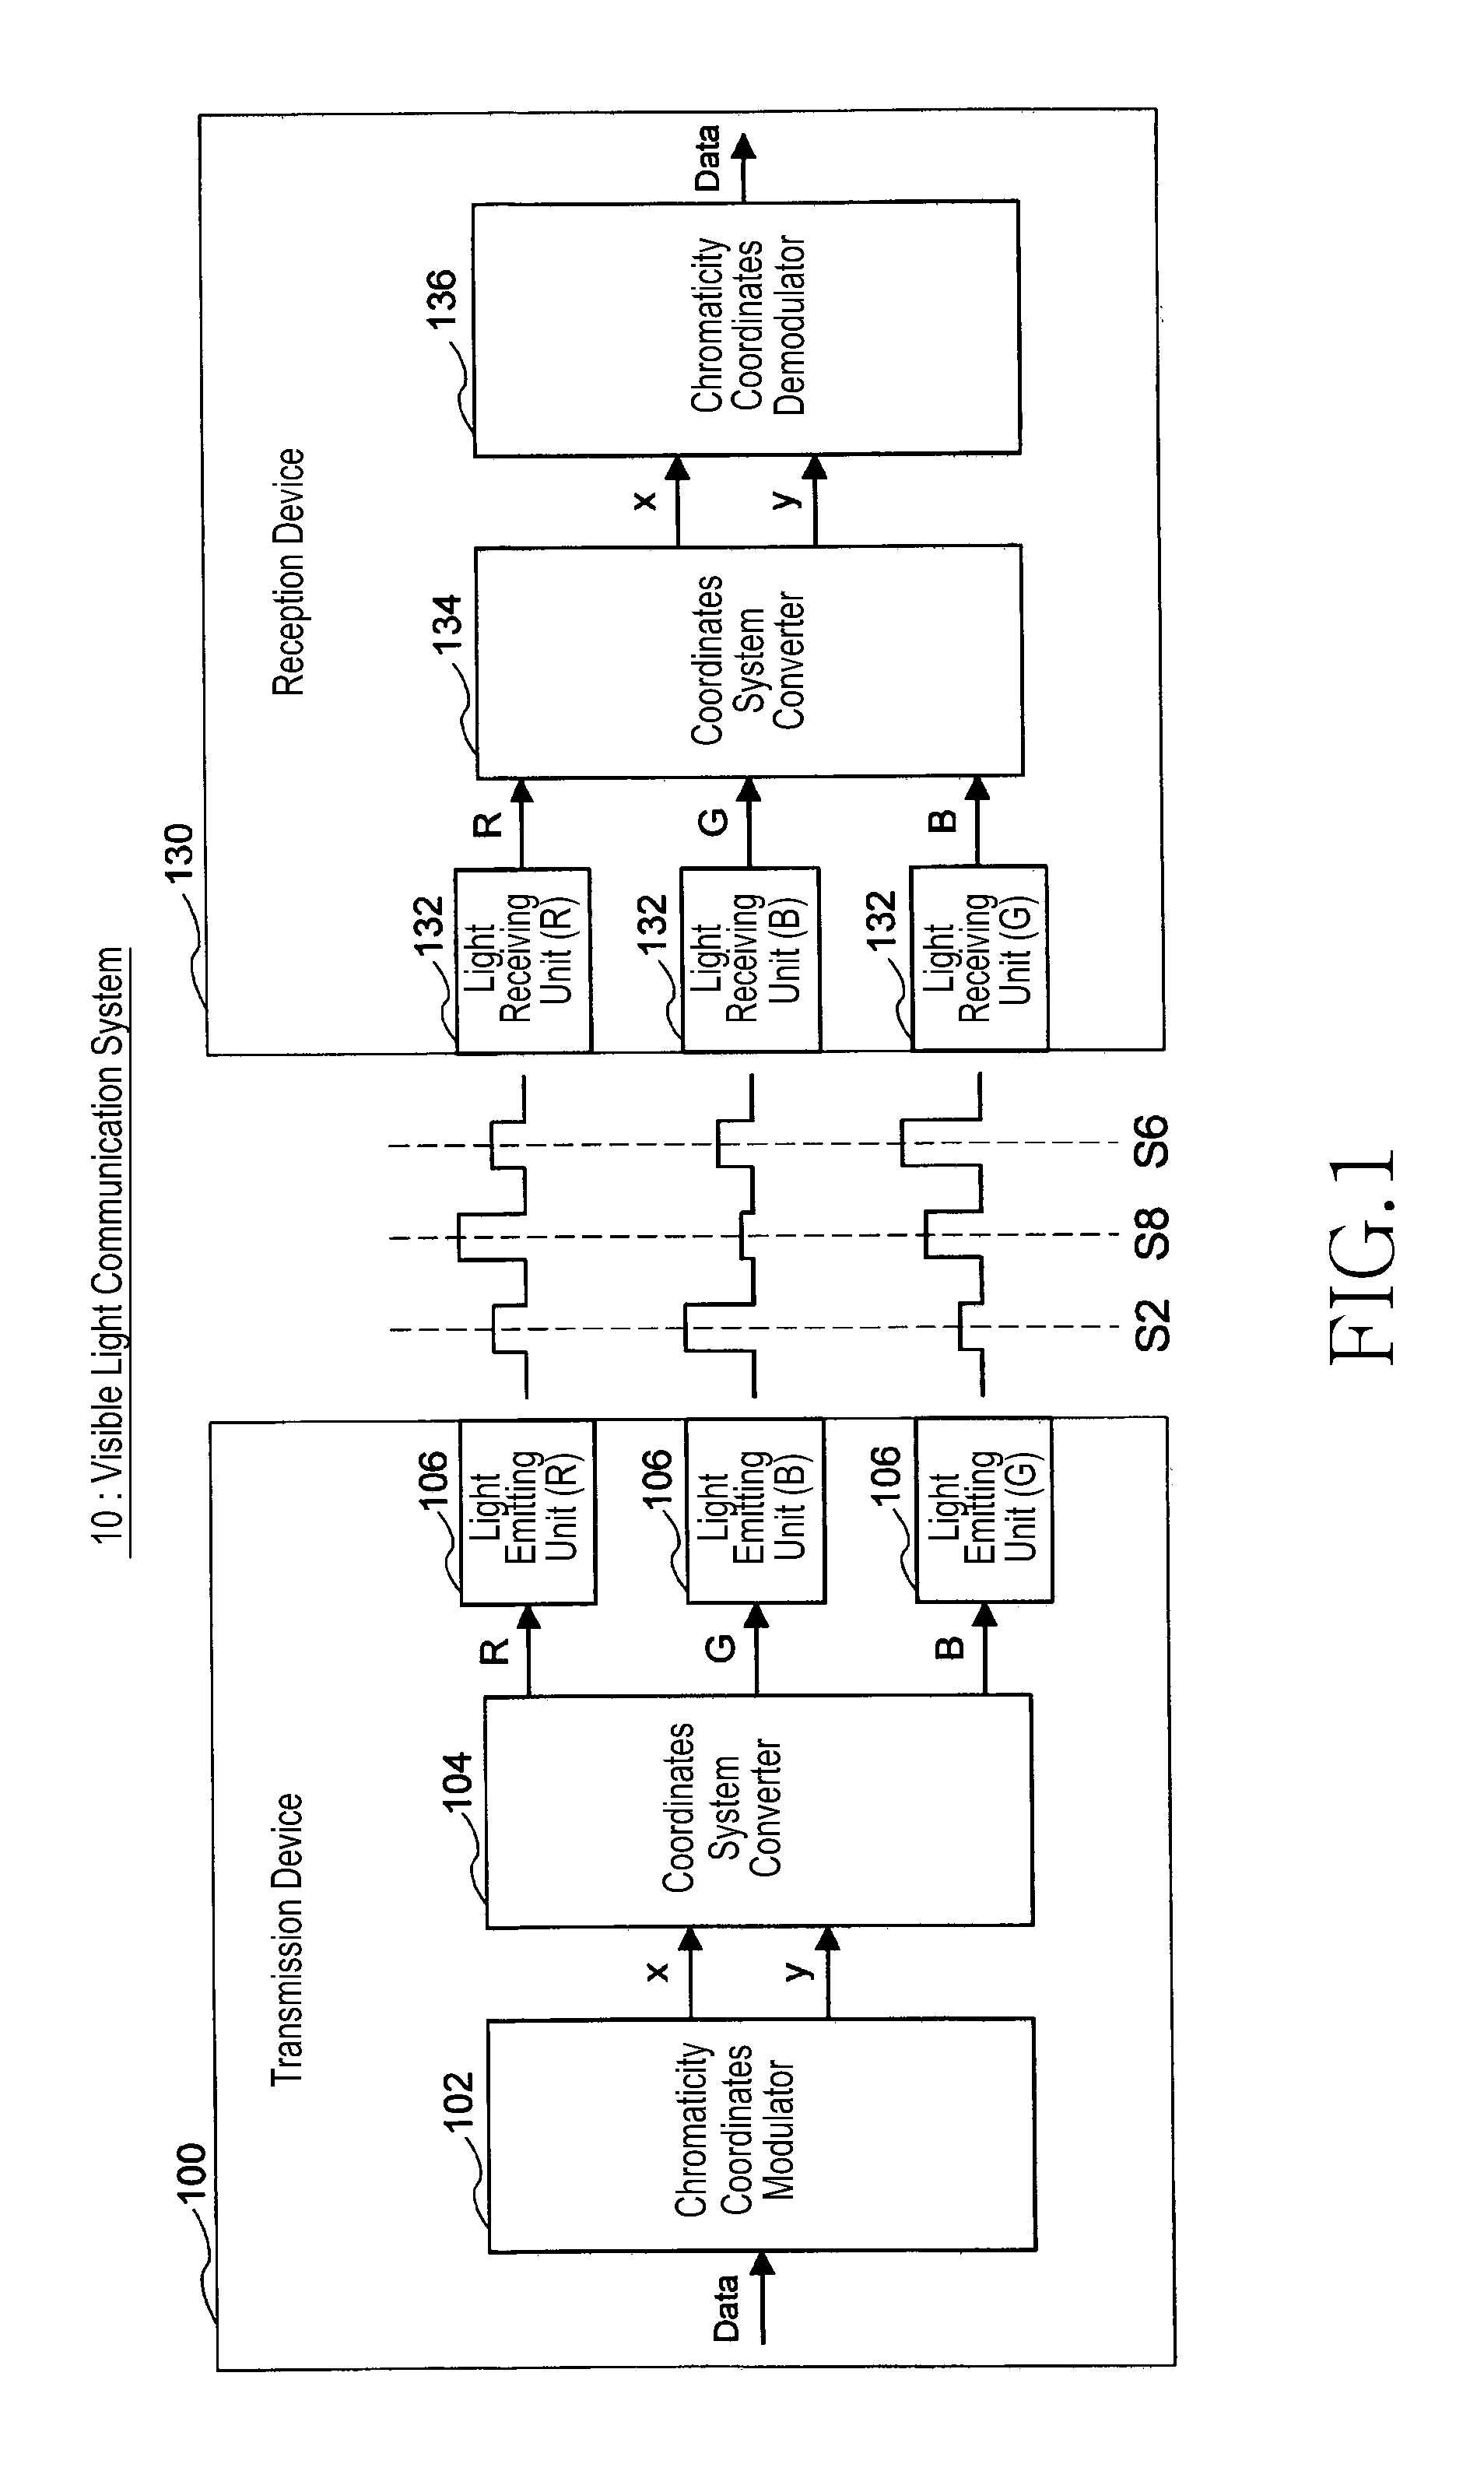 Visible-light communication system system and method